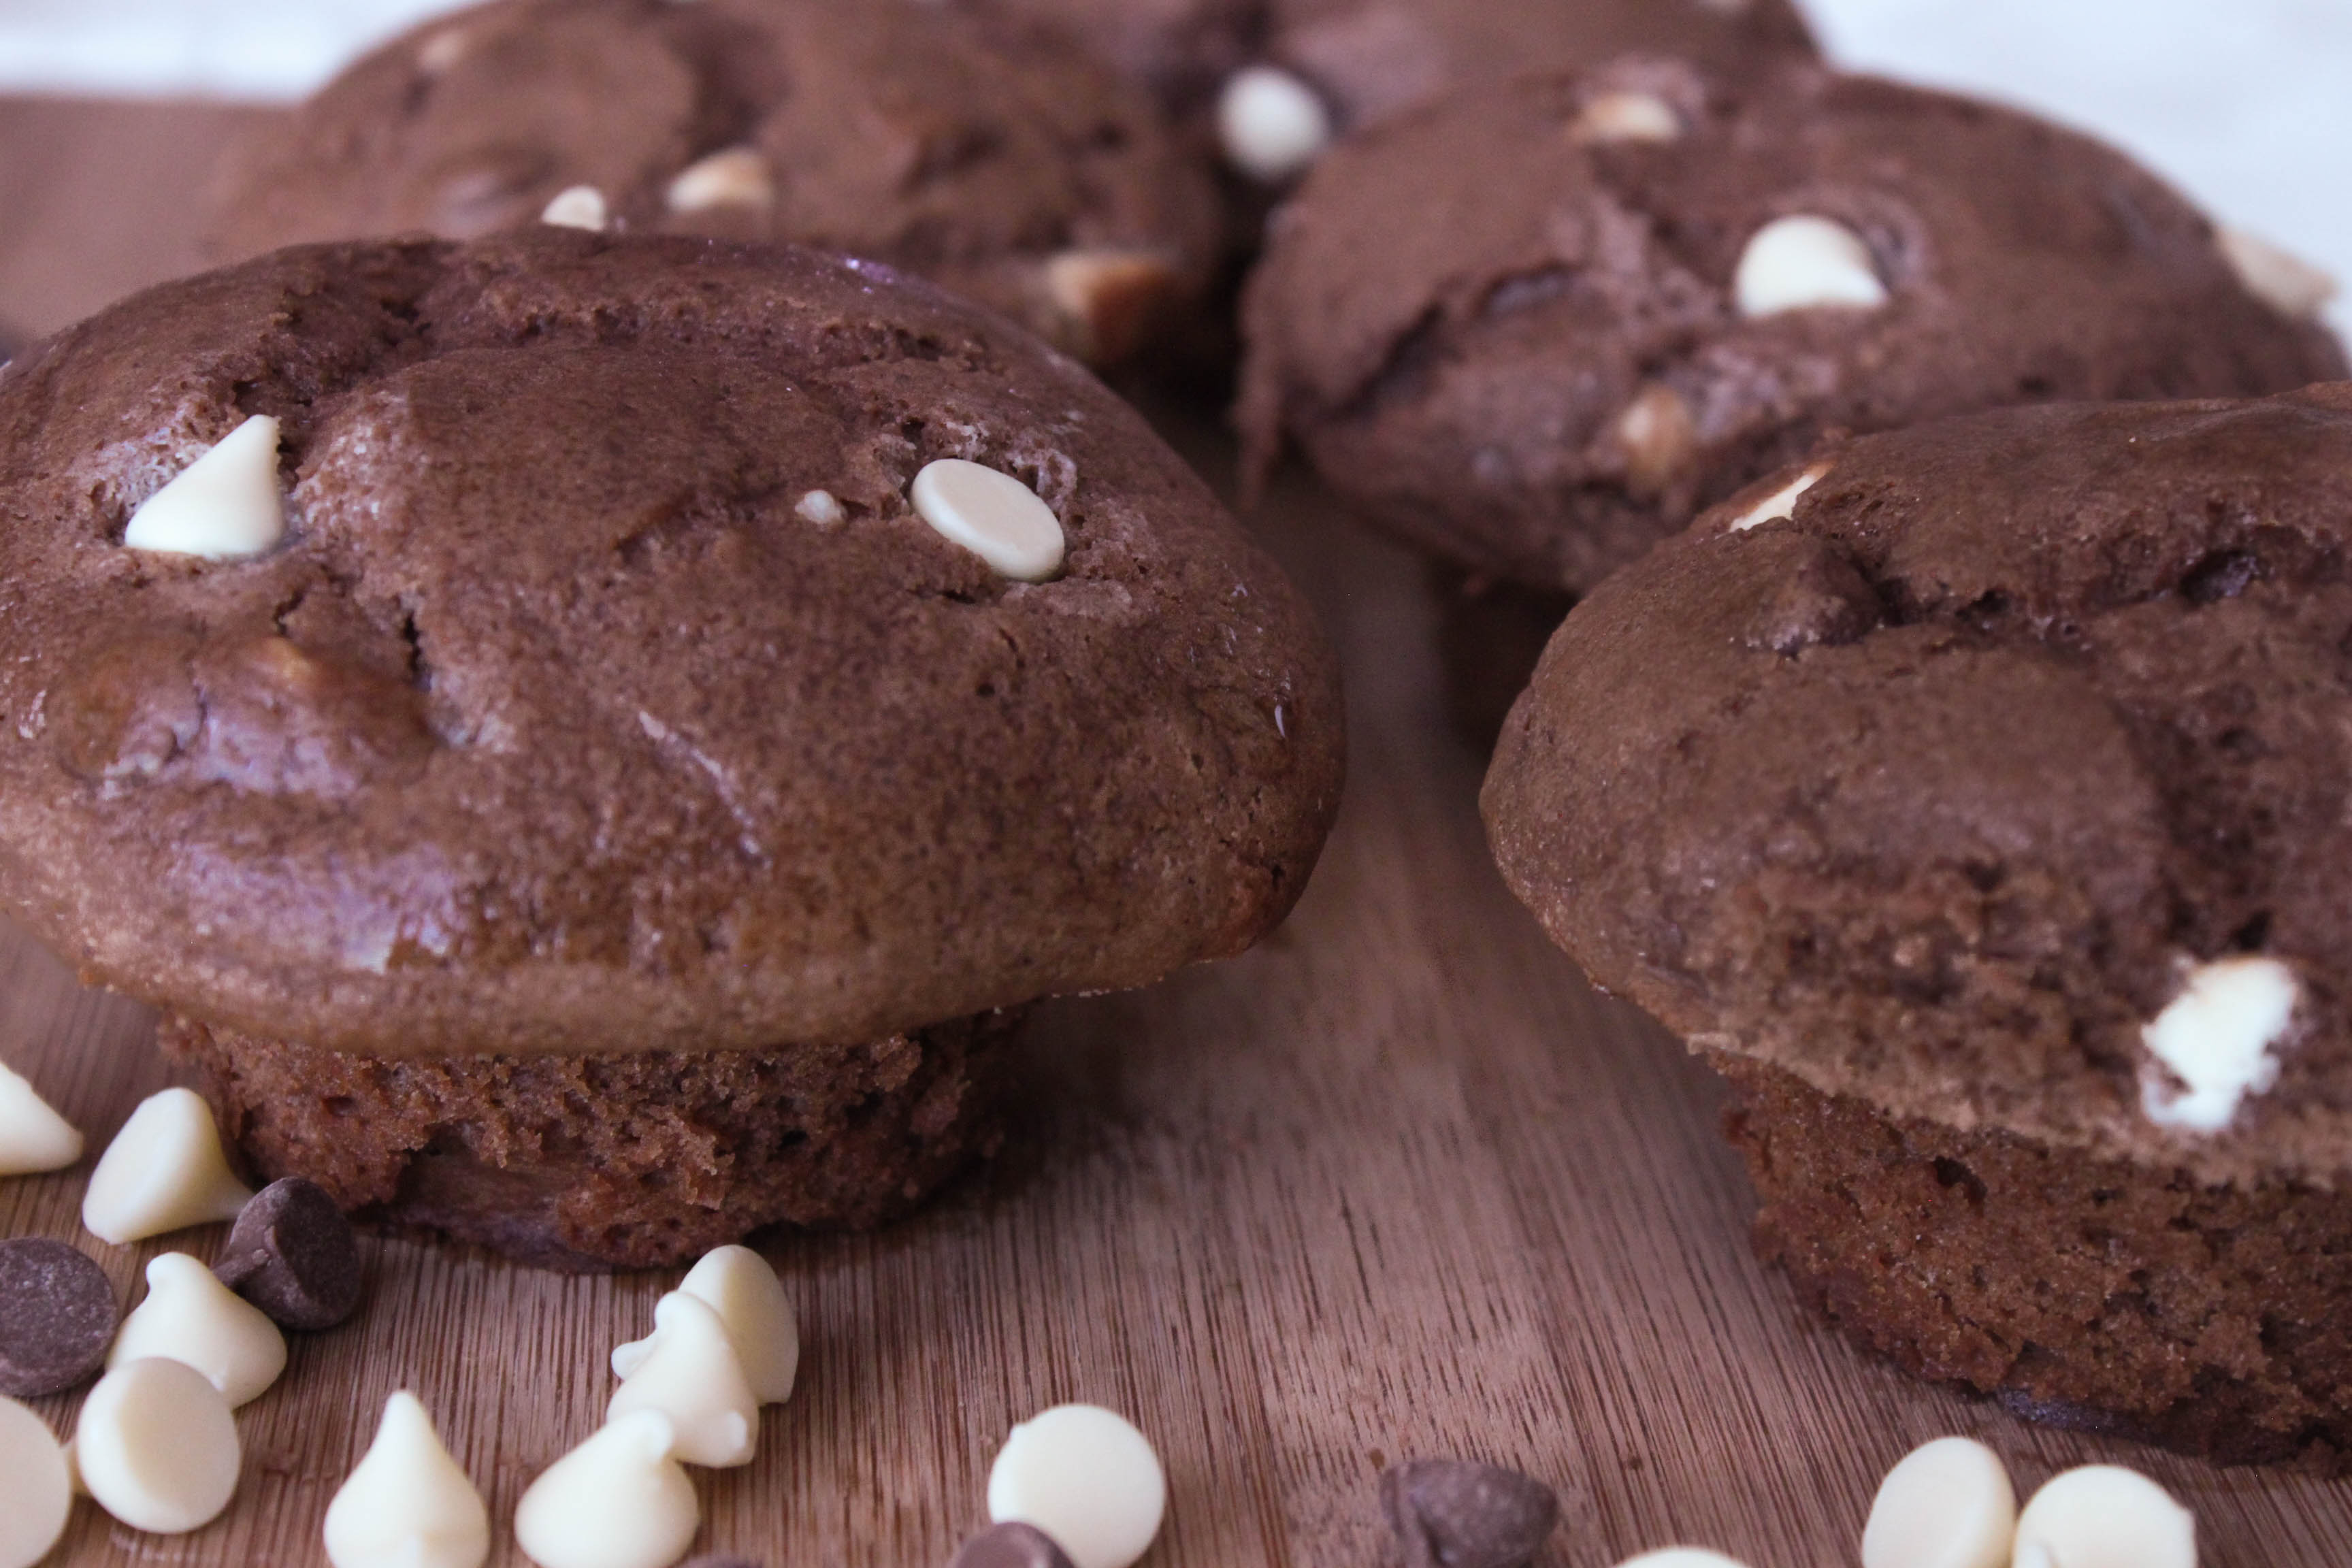 Triple chocolate muffins - soft, rich and delicious.